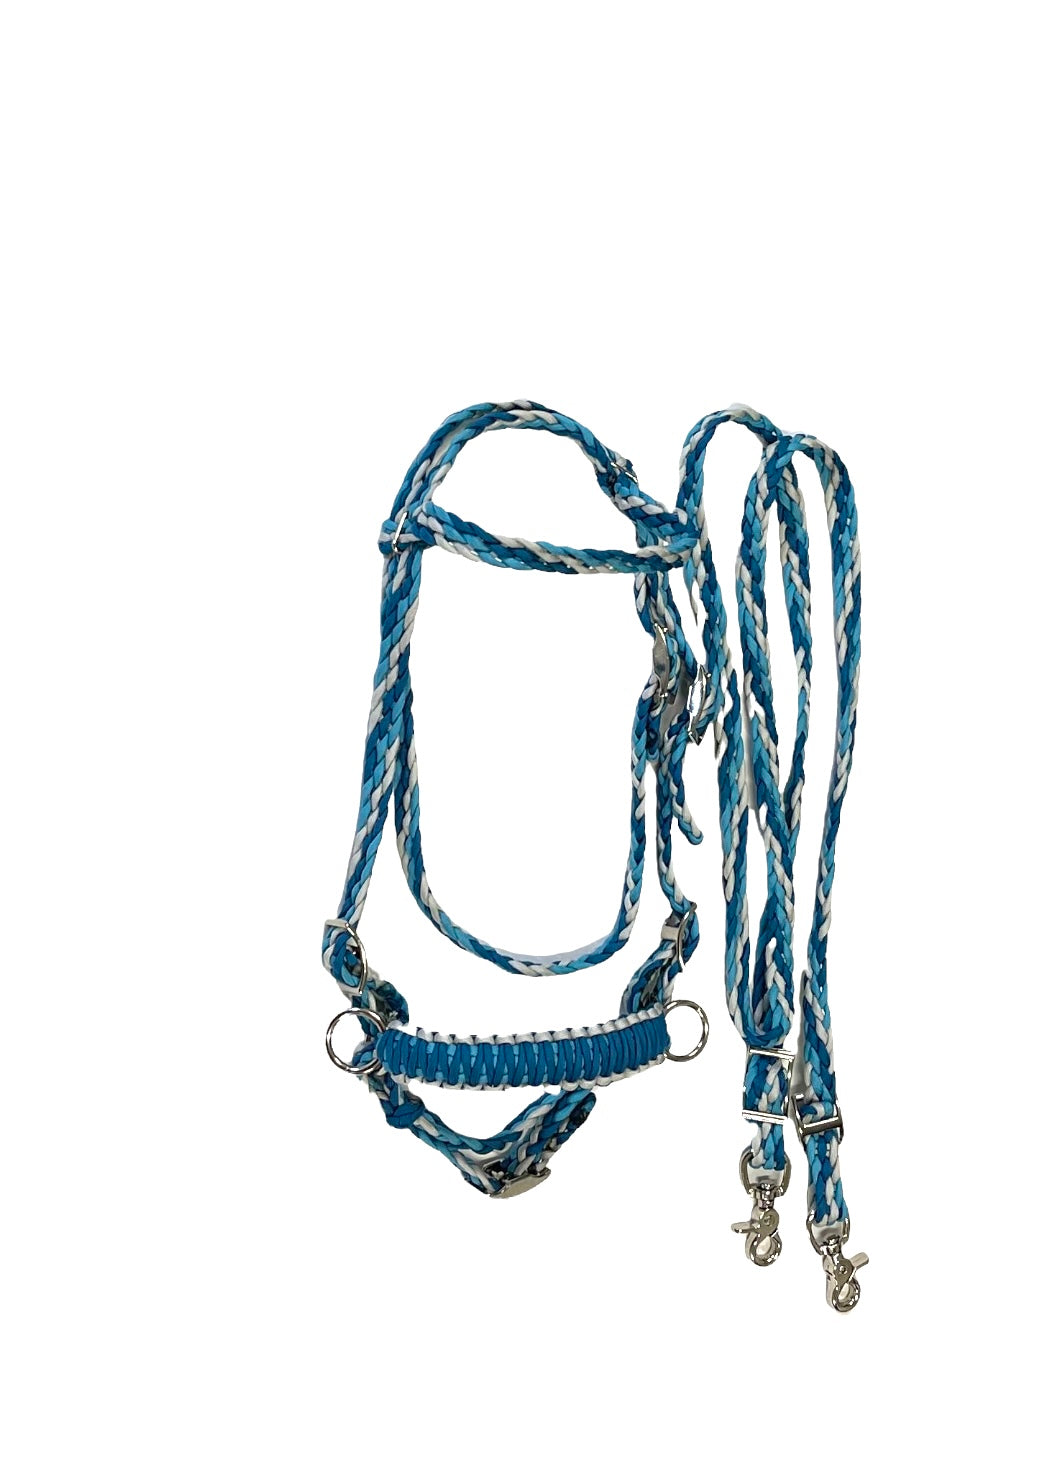 complete bitless bridle side pull hackamore teal and silver with reins ....pony, Cob, Horse. or Draft horse size